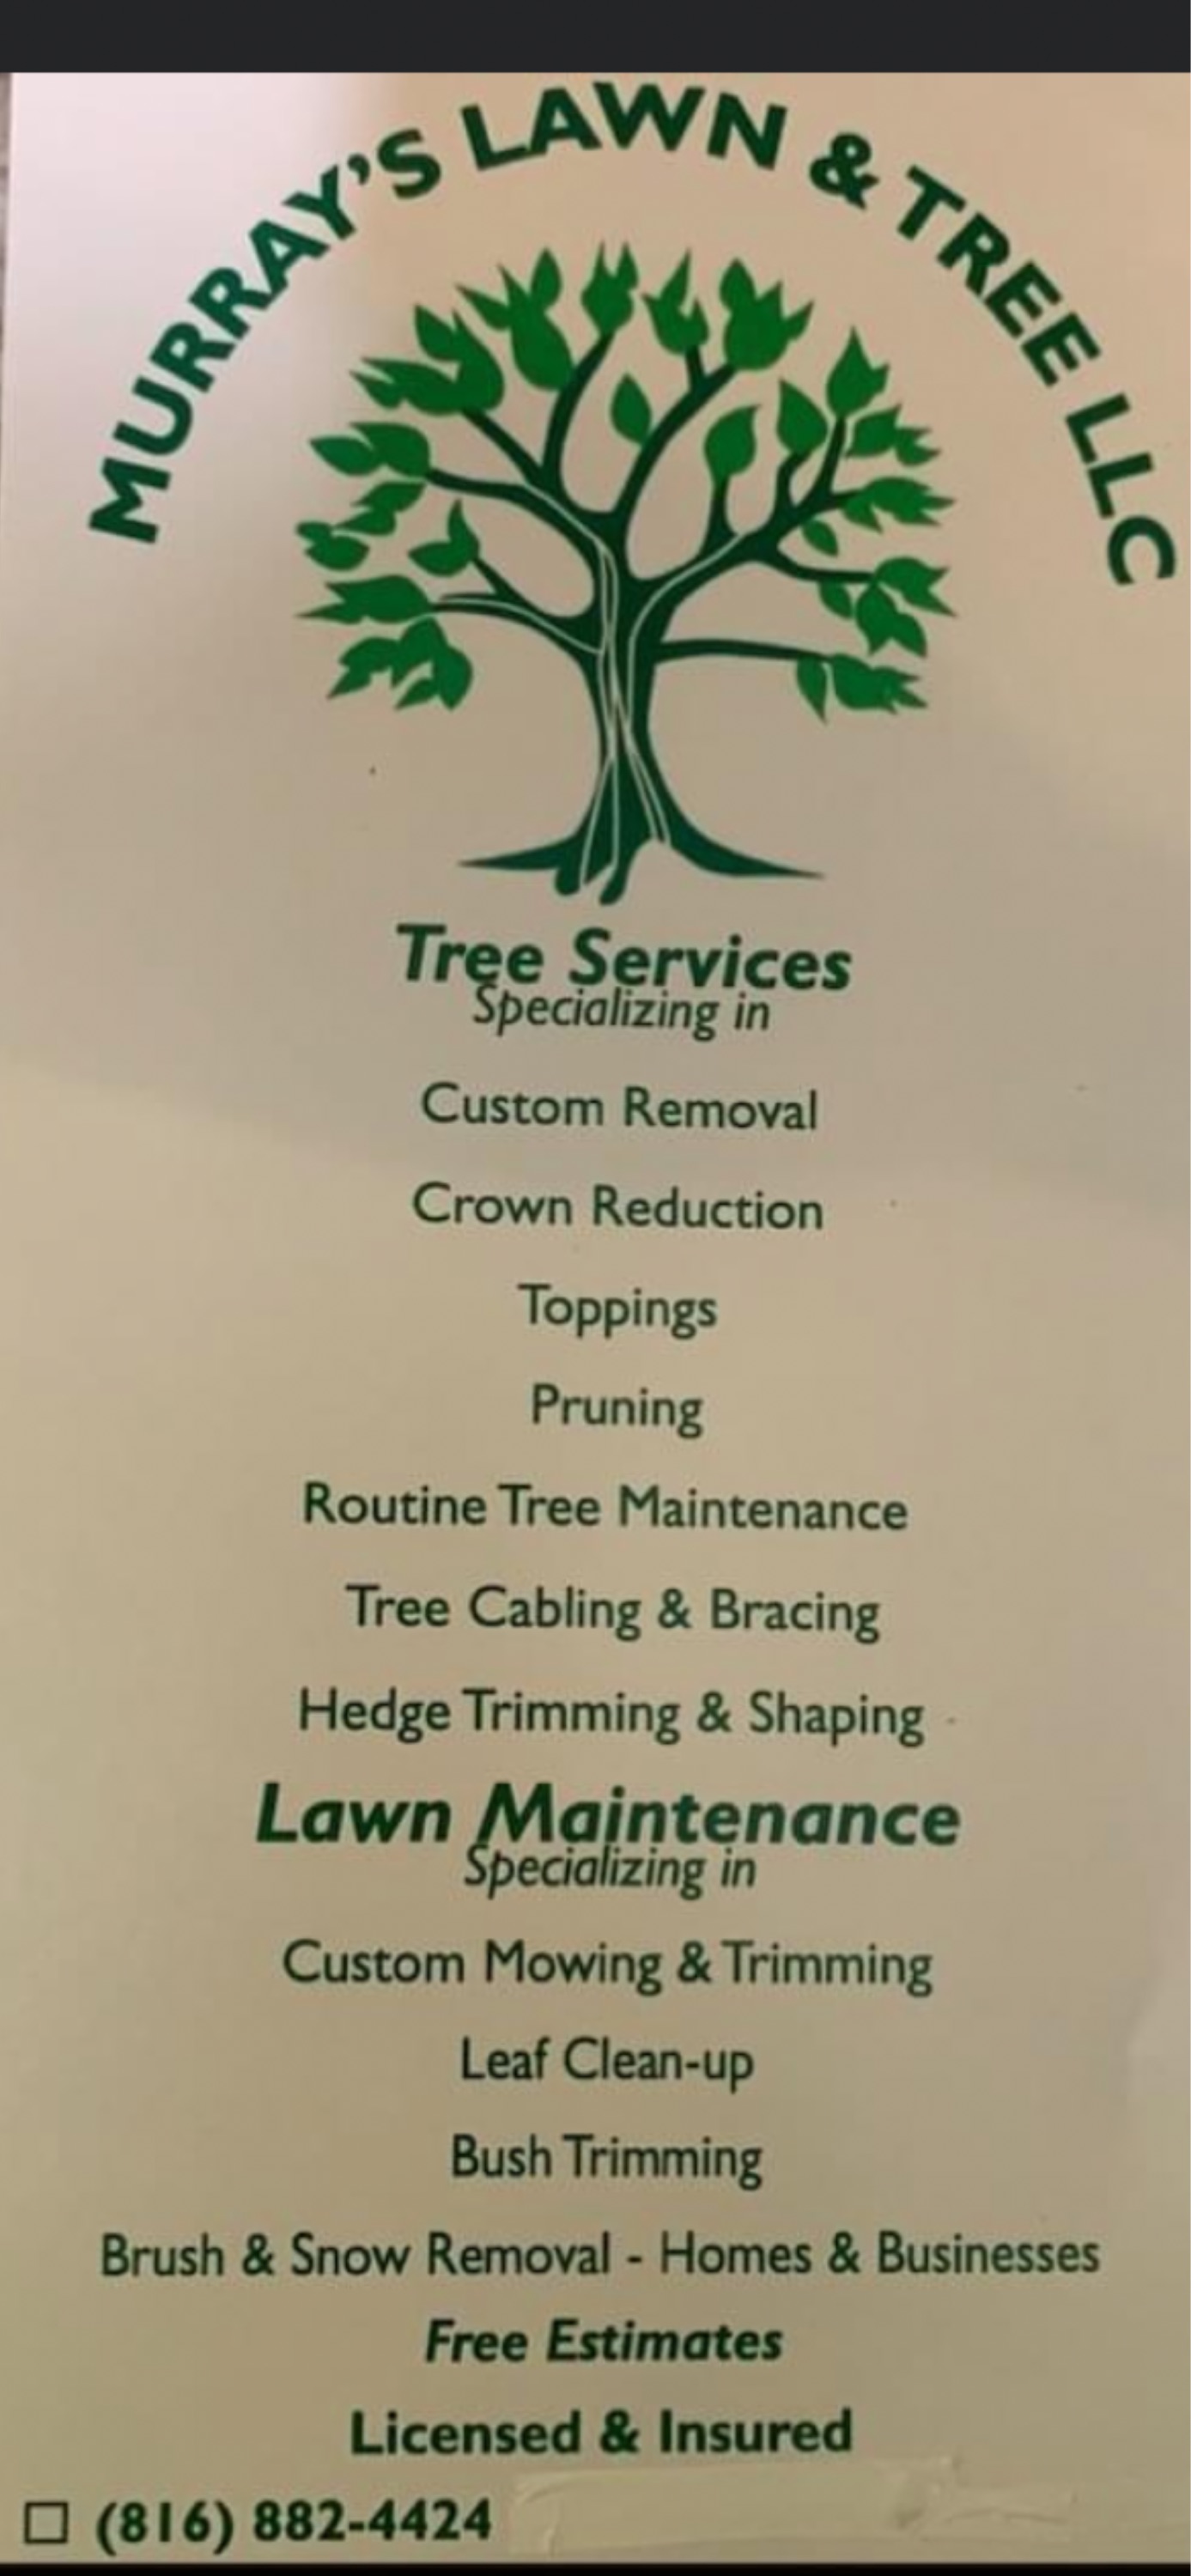 Murray's Lawn And Tree Logo